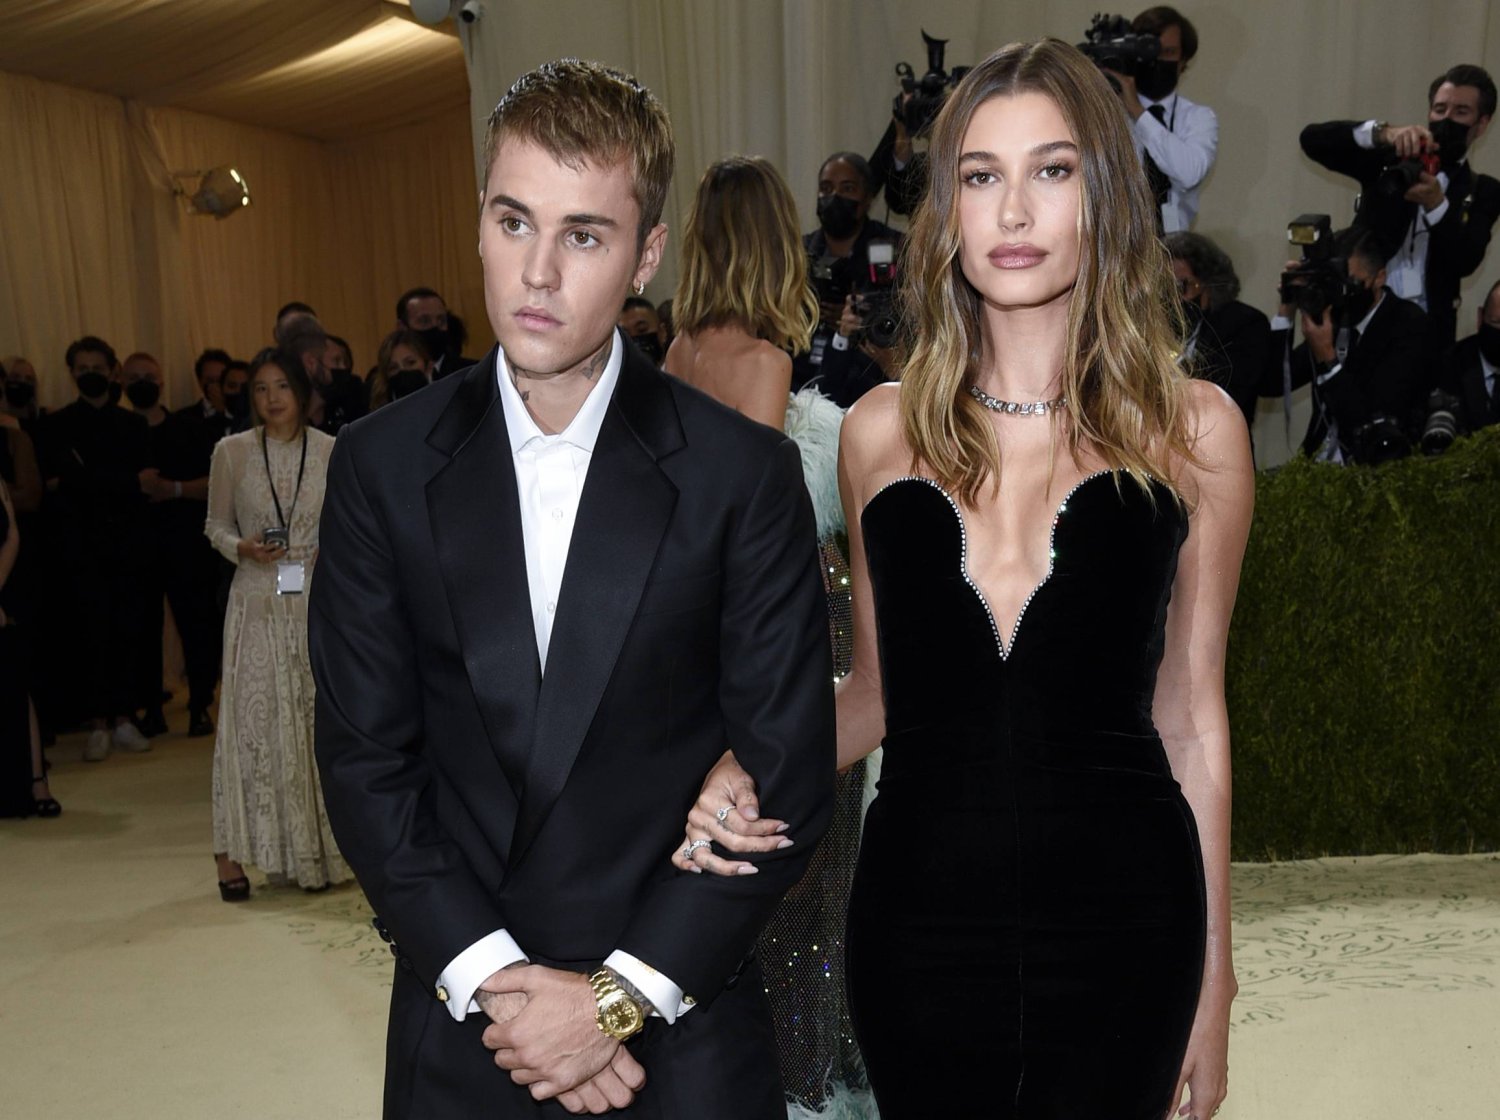 FILE - Justin Bieber, left, and Hailey Bieber attend The Metropolitan Museum of Art's Costume Institute benefit gala on Sept. 13, 2021, in New York. (Photo by Evan Agostini/Invision/AP, File)